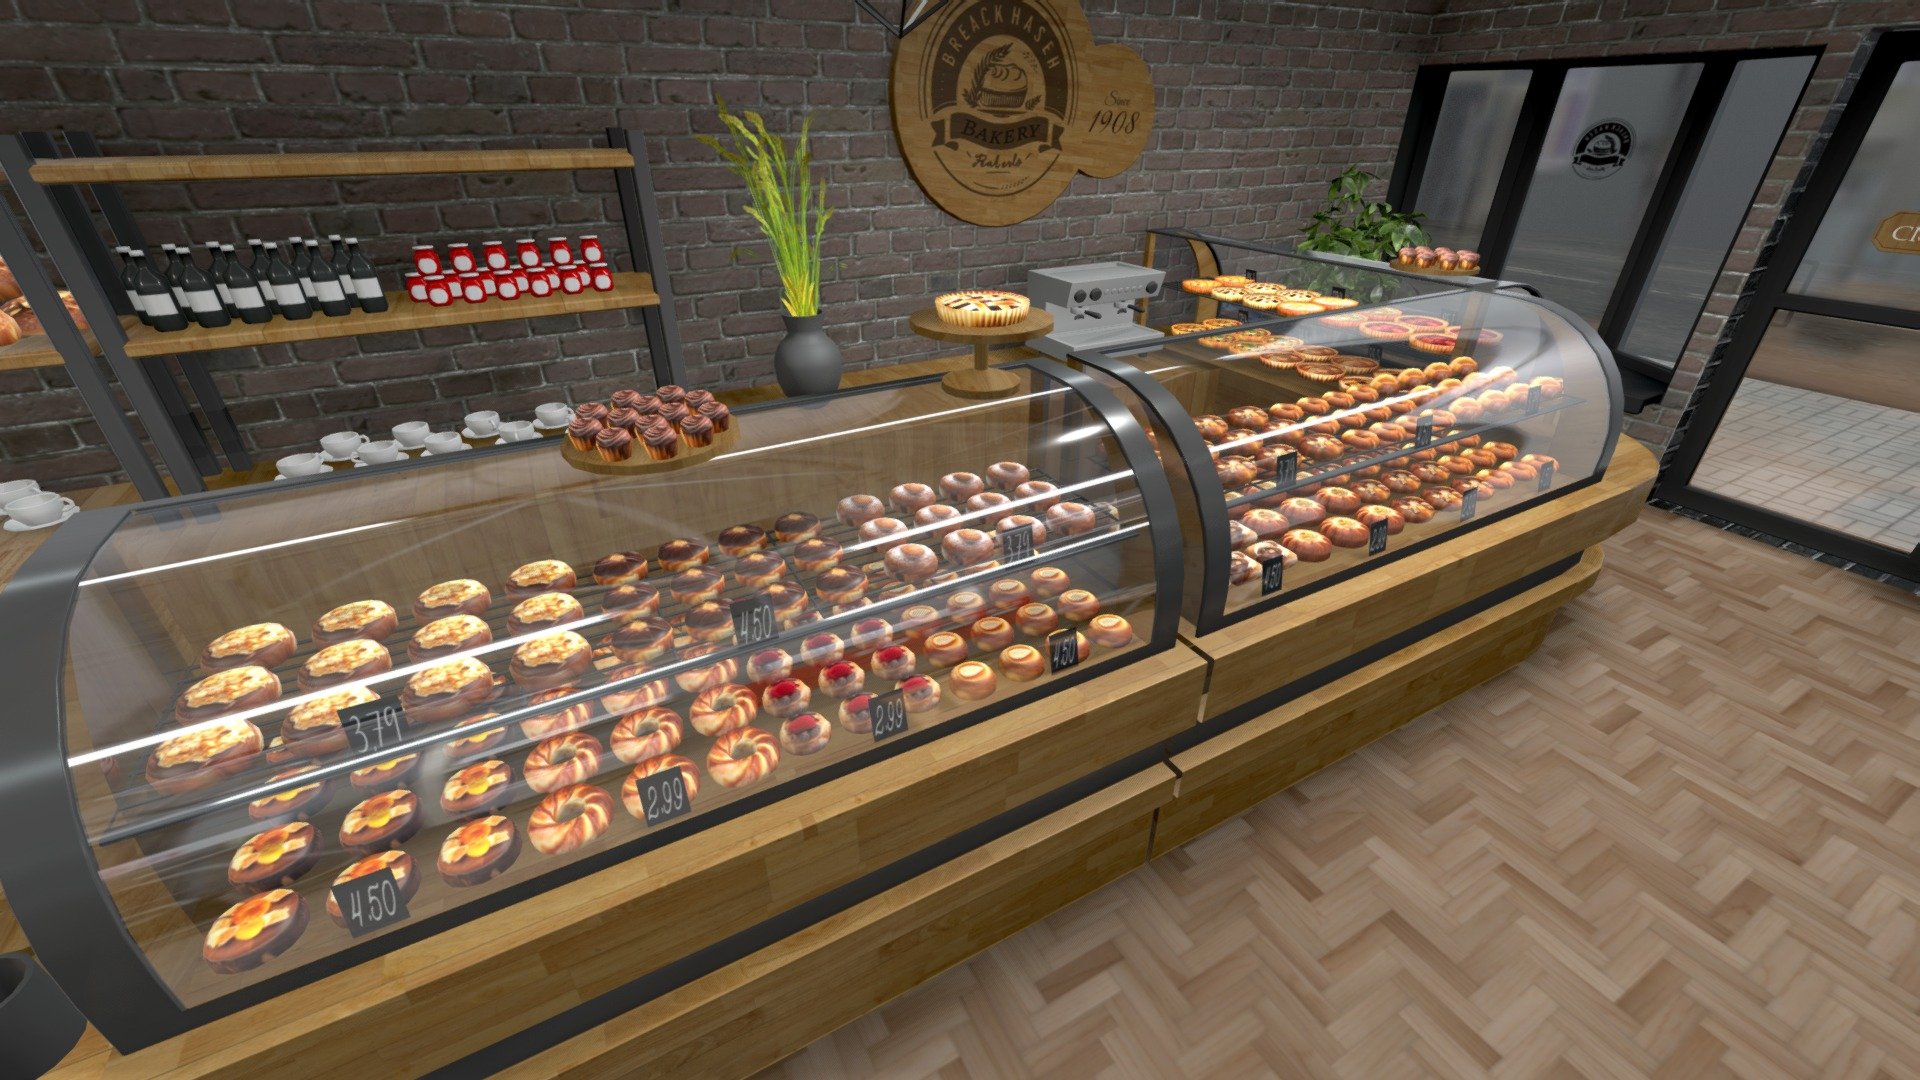 Step into a delicious world of pastries with this charming 3D asset! Explore a fully furnished pastry shop filled with mouthwatering treats. From flaky croissants to decadent pies, the shelves are stocked with irresistible delights. Enjoy the seating area or gaze at the tempting displays in the inviting exterior. Perfect for architectural visualization, game development, and more. Bring the sweet aromas and delightful atmosphere of a pastry shop to your projects! - Bakery / Pastry shop - Buy Royalty Free 3D model by Janis Zeps (@zeps9001) 3d model